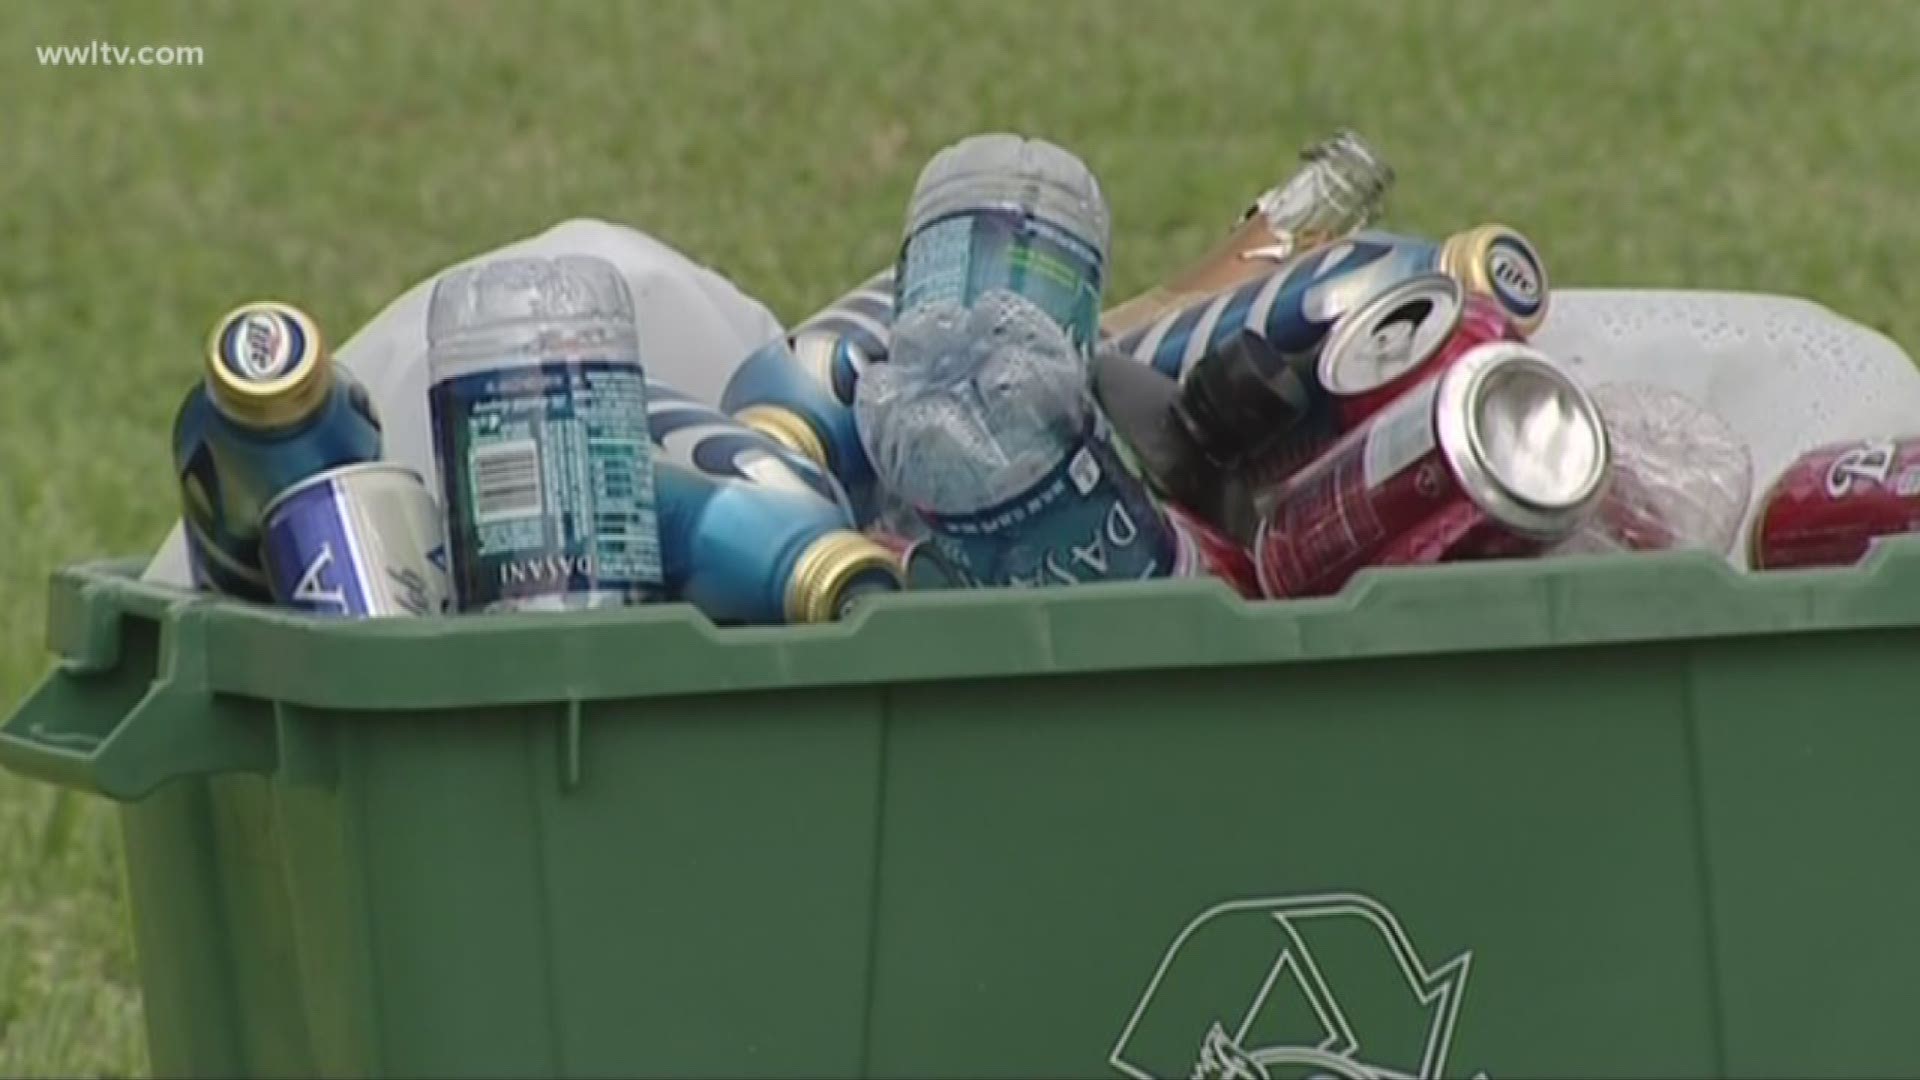 Jefferson Parish officials say they're trying to re-structure their program now that China is refusing most recyclables.